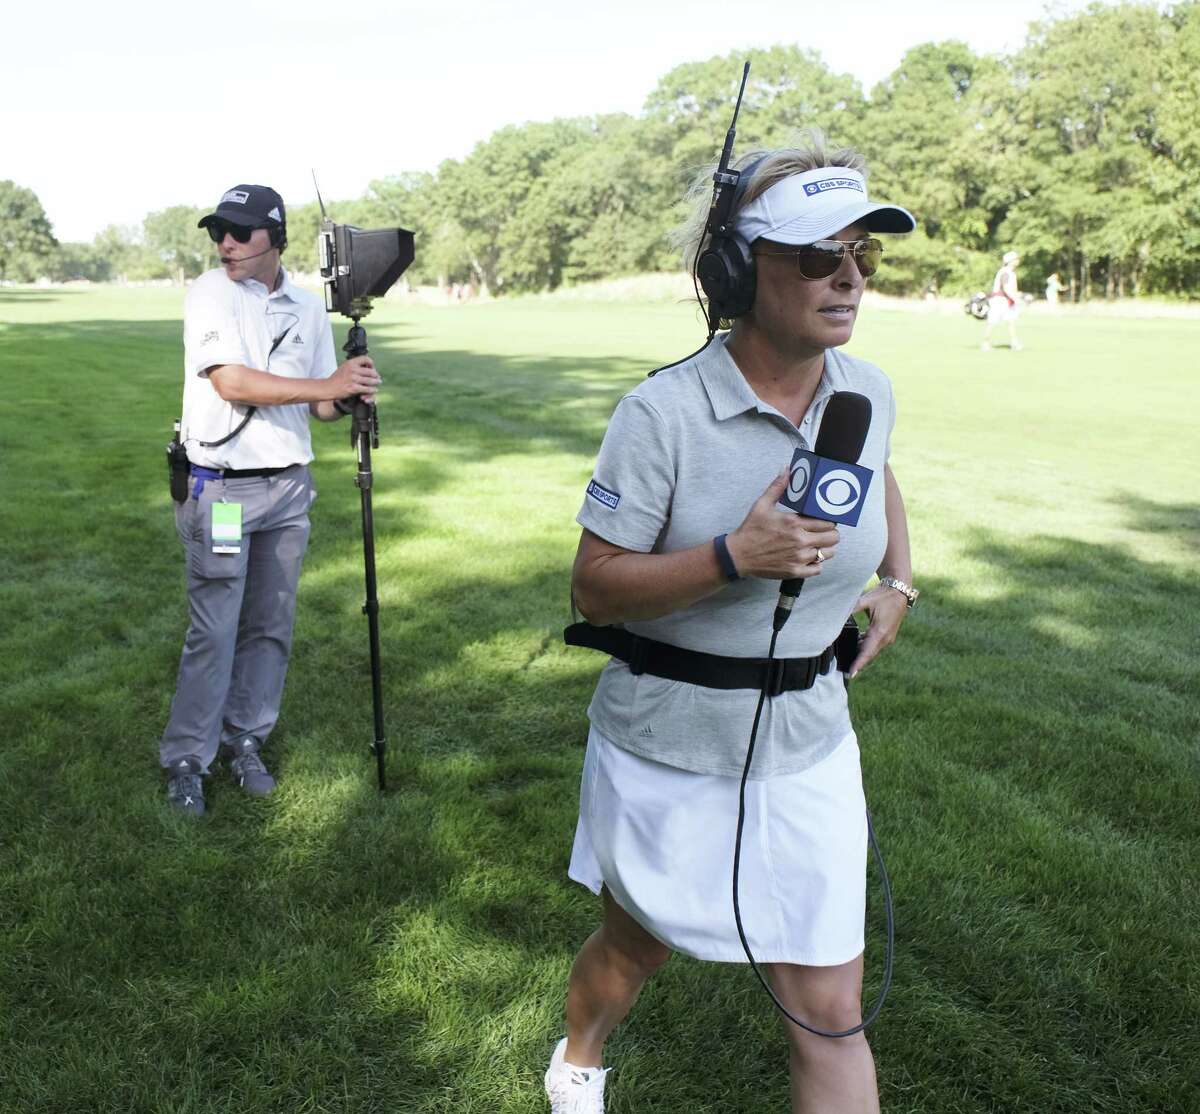 PGA TOUR ON CBS PICTURED: Dottie Pepper CBS Sports On-Course Golf Reporter Barclay\'s Golf Tournament Bethpage Black Course, NY Photo Cr.: Timothy Kuratek CBS A?Ac.2016 CBS Broadcasting Inc. All Rights Reserved